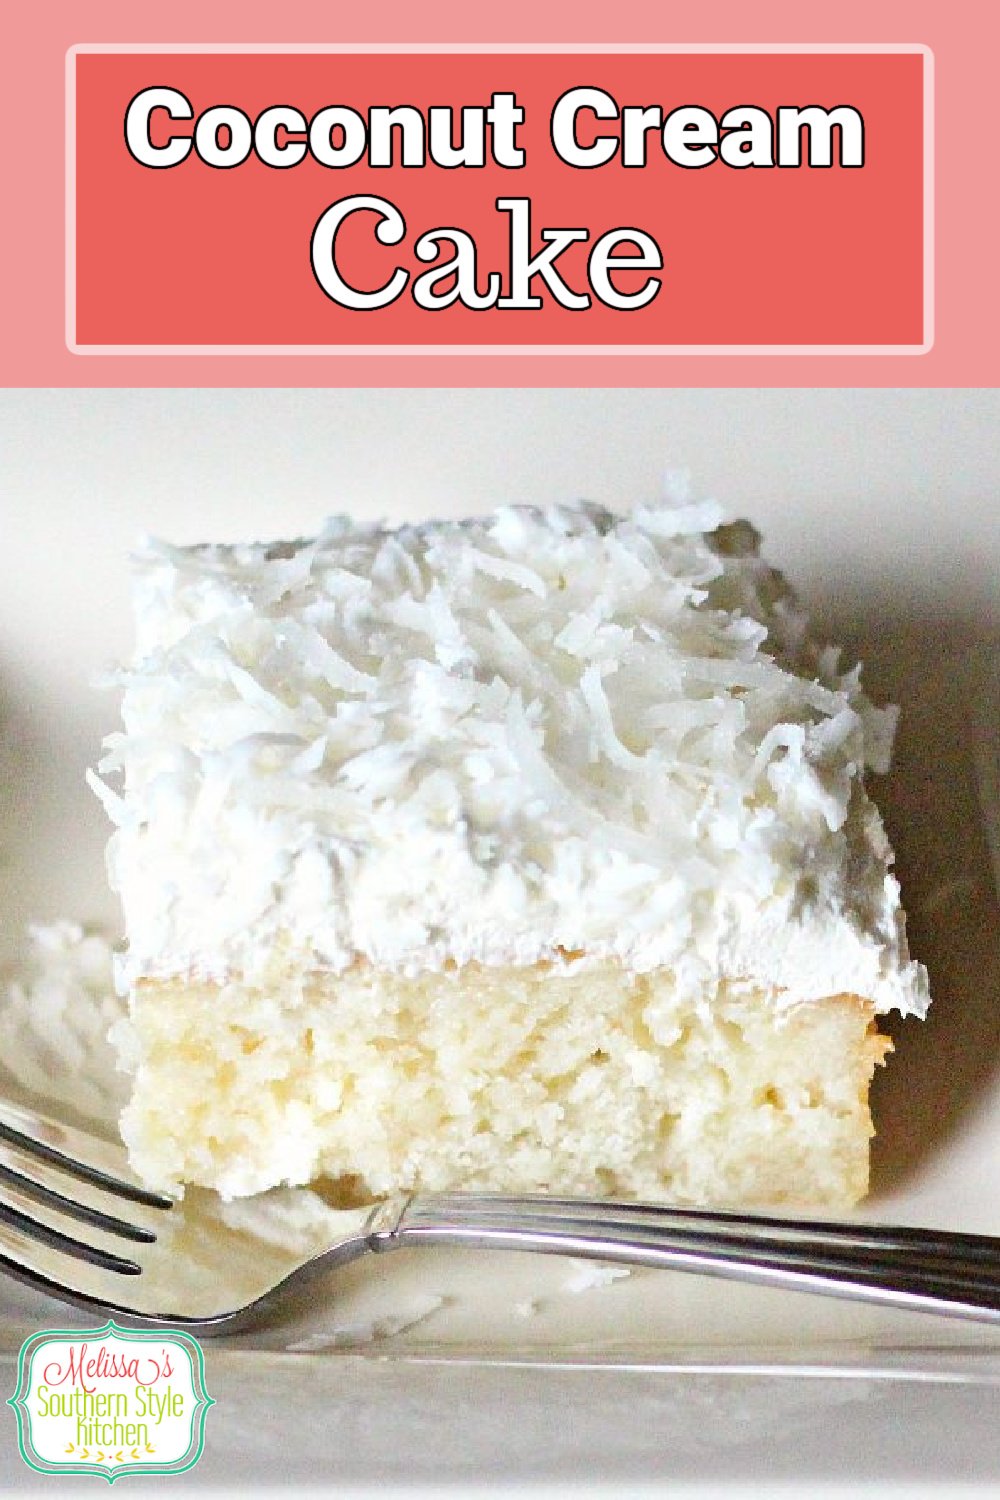 If you like coconut cream pie you'll love this heavenly Coconut Cream Cake #coconutcreamcake #coconutcream #cakes #cakerecipes #coconutsheetcake #sheetscakes #southerncakes #southernrecipes #easterdesserts #eastercakes